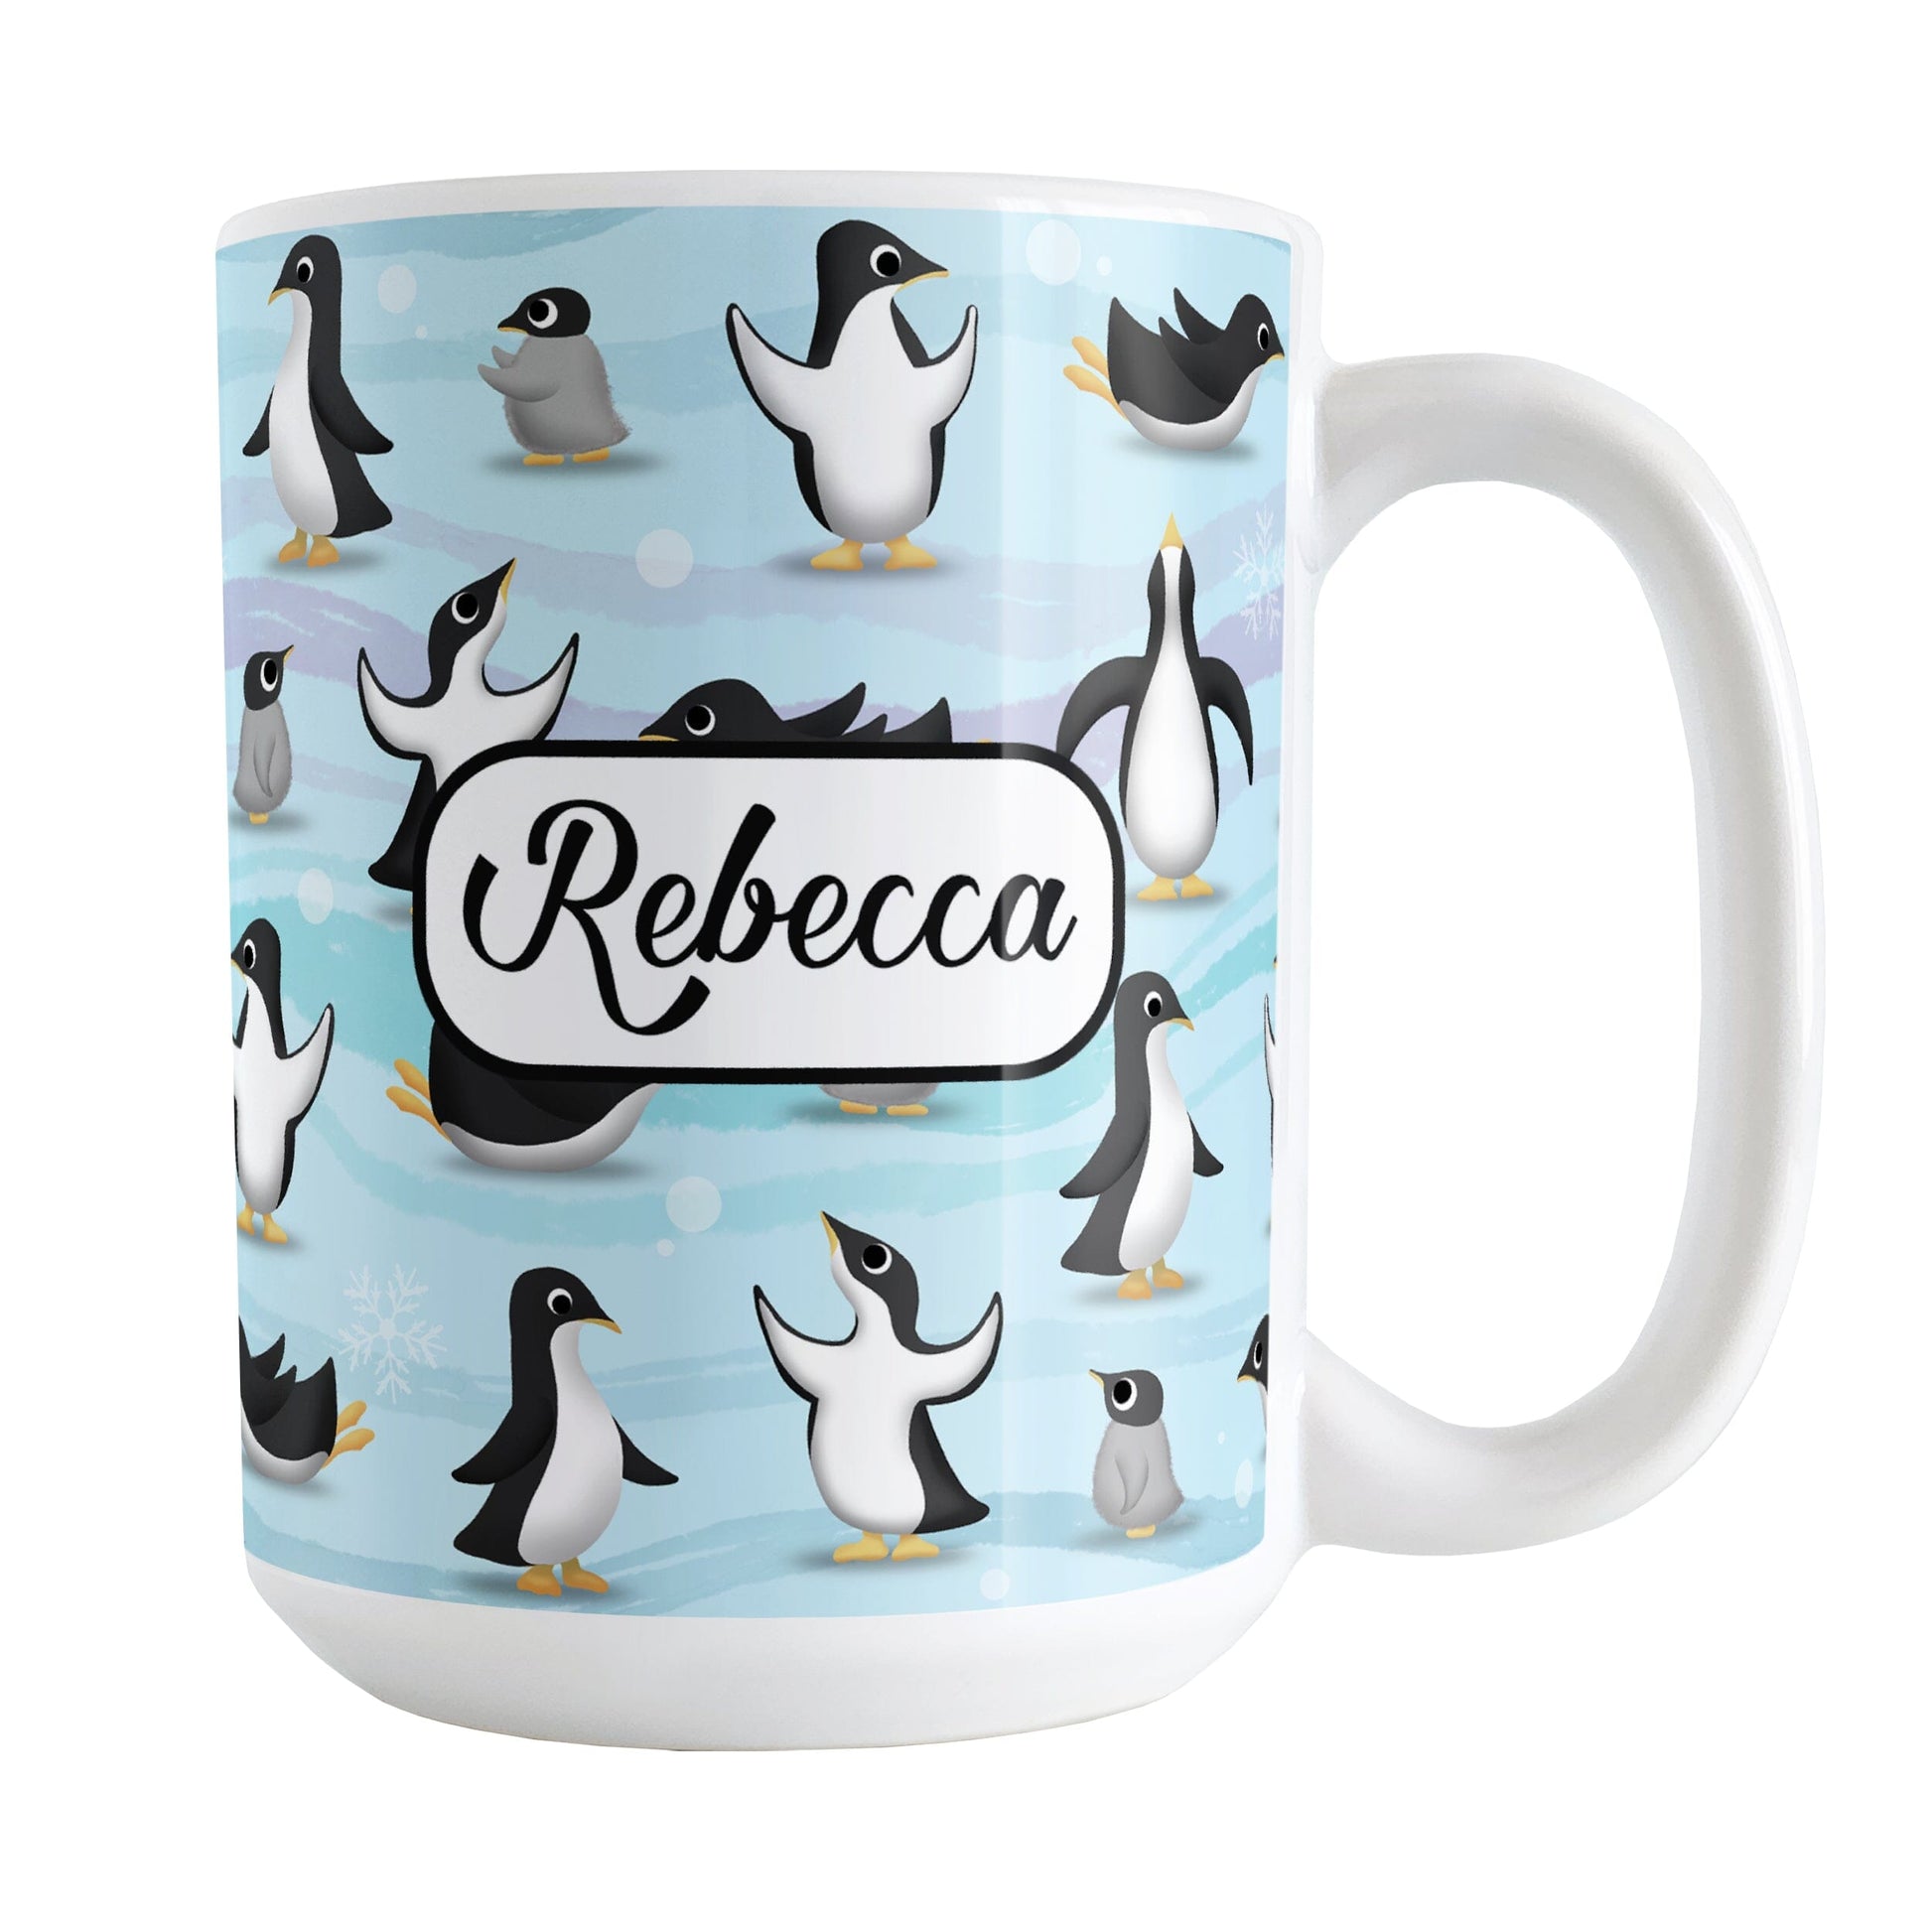 Personalized Penguin Parade Pattern Mug (15oz) at Amy's Coffee Mugs. A ceramic coffee mug designed with a fun penguin parade pattern featuring a variety of penguins and baby penguins over an Antarctic background with waves of blue, turquoise, and purple colors with hints of snowflakes that wraps around the mug. Your name is personalized in a black script font on both sides of the mug over the cute penguin pattern.